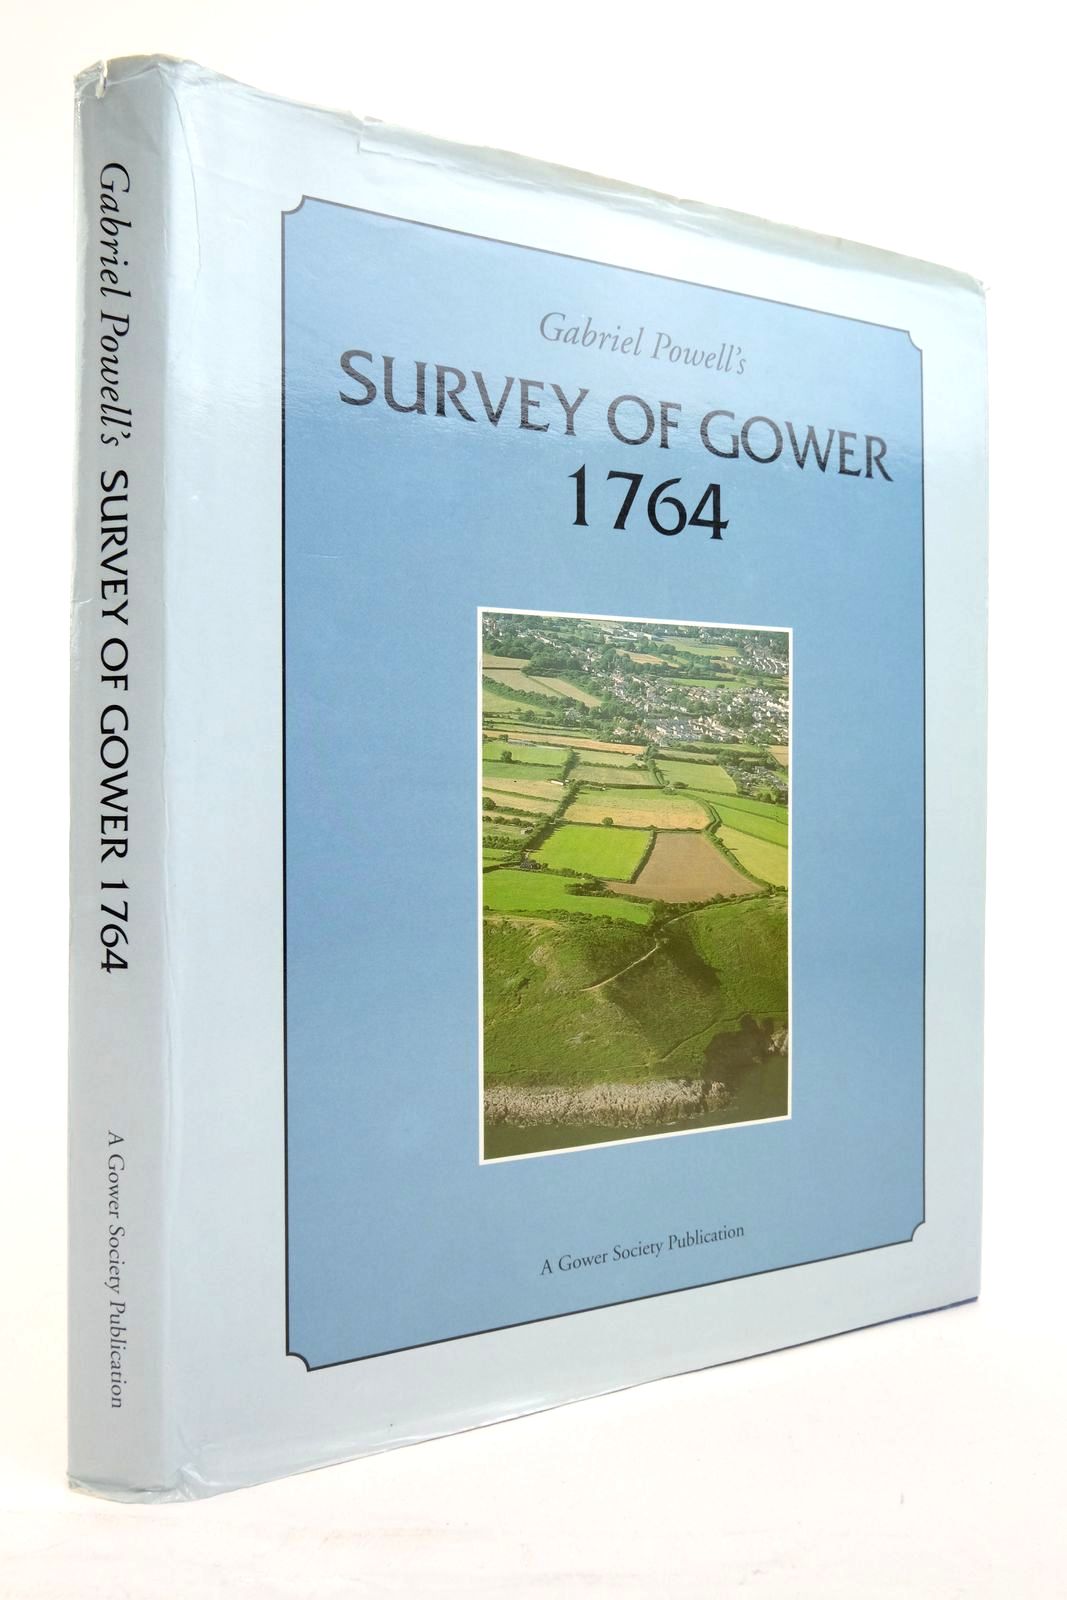 Photo of GABRIEL POWELL'S SURVEY OF THE LORDSHIP OF GOWER 1764 written by Powell, Gabriel Morris, Bernard published by The Gower Society (STOCK CODE: 2137890)  for sale by Stella & Rose's Books